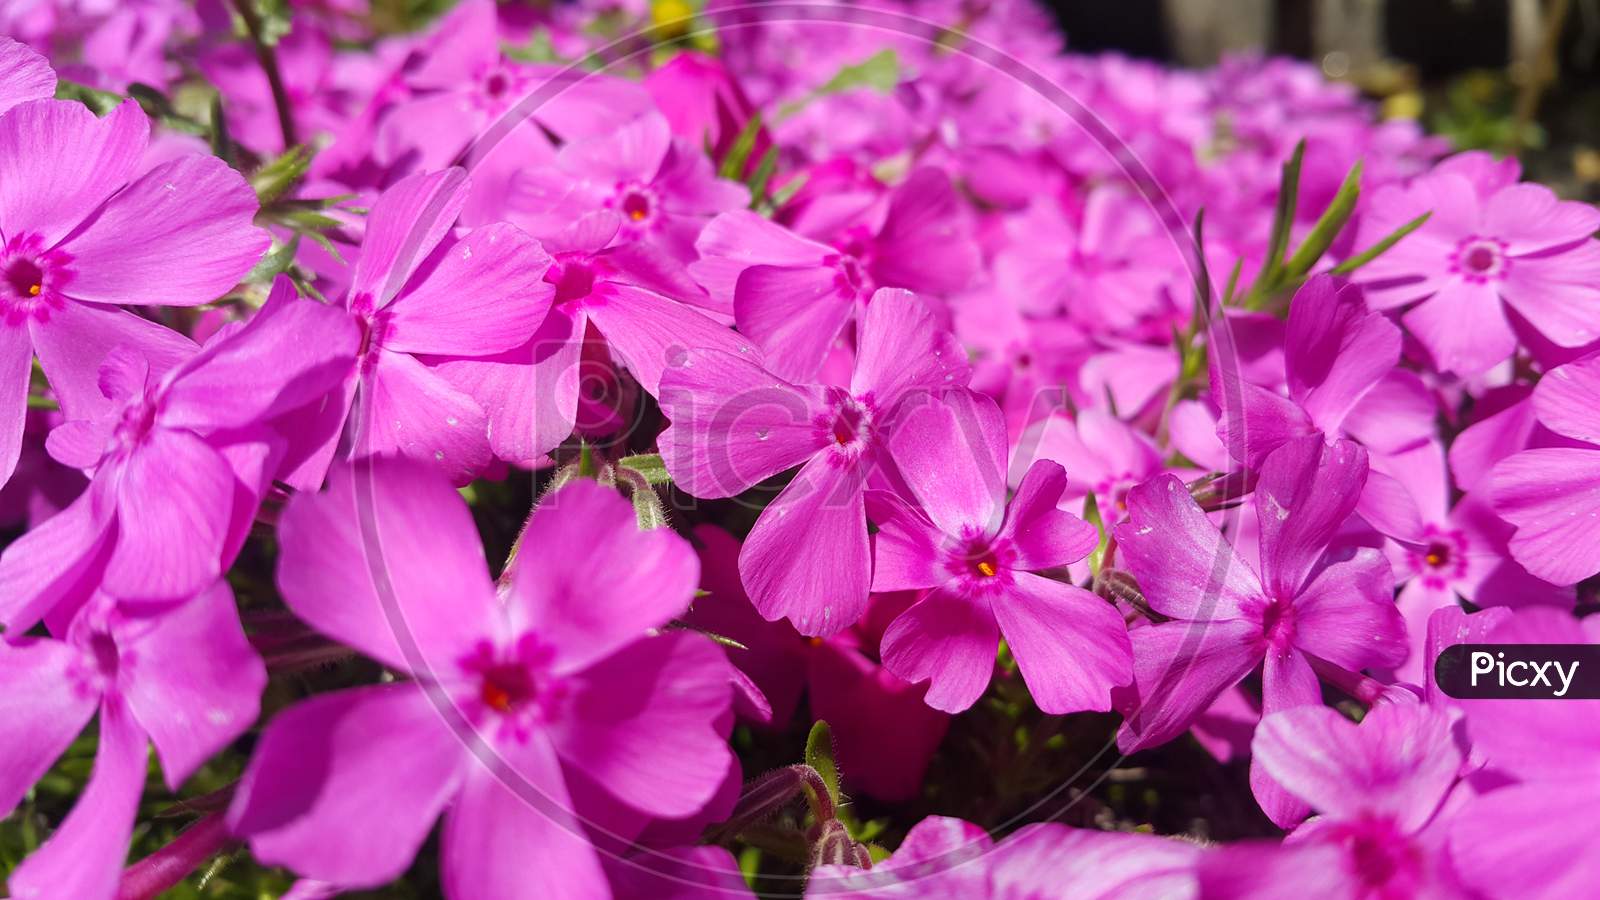 Close Up View Of Several Pink Flowers Under Sunlight With Pink Petals